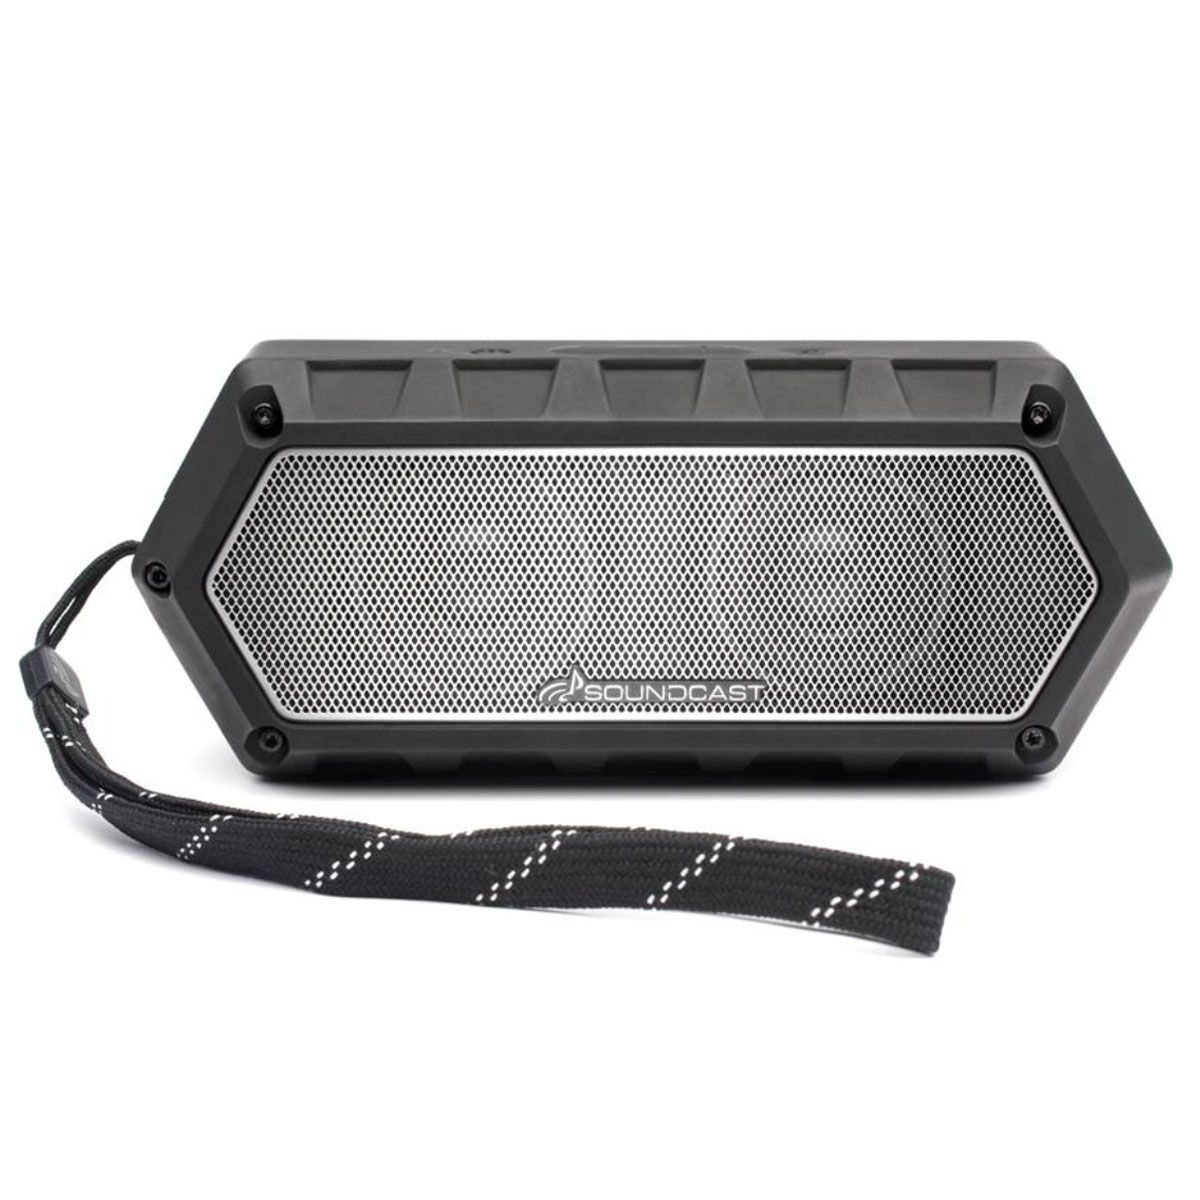 Soundcast VG1
Waterproof portable Bluetooth® speaker, front view